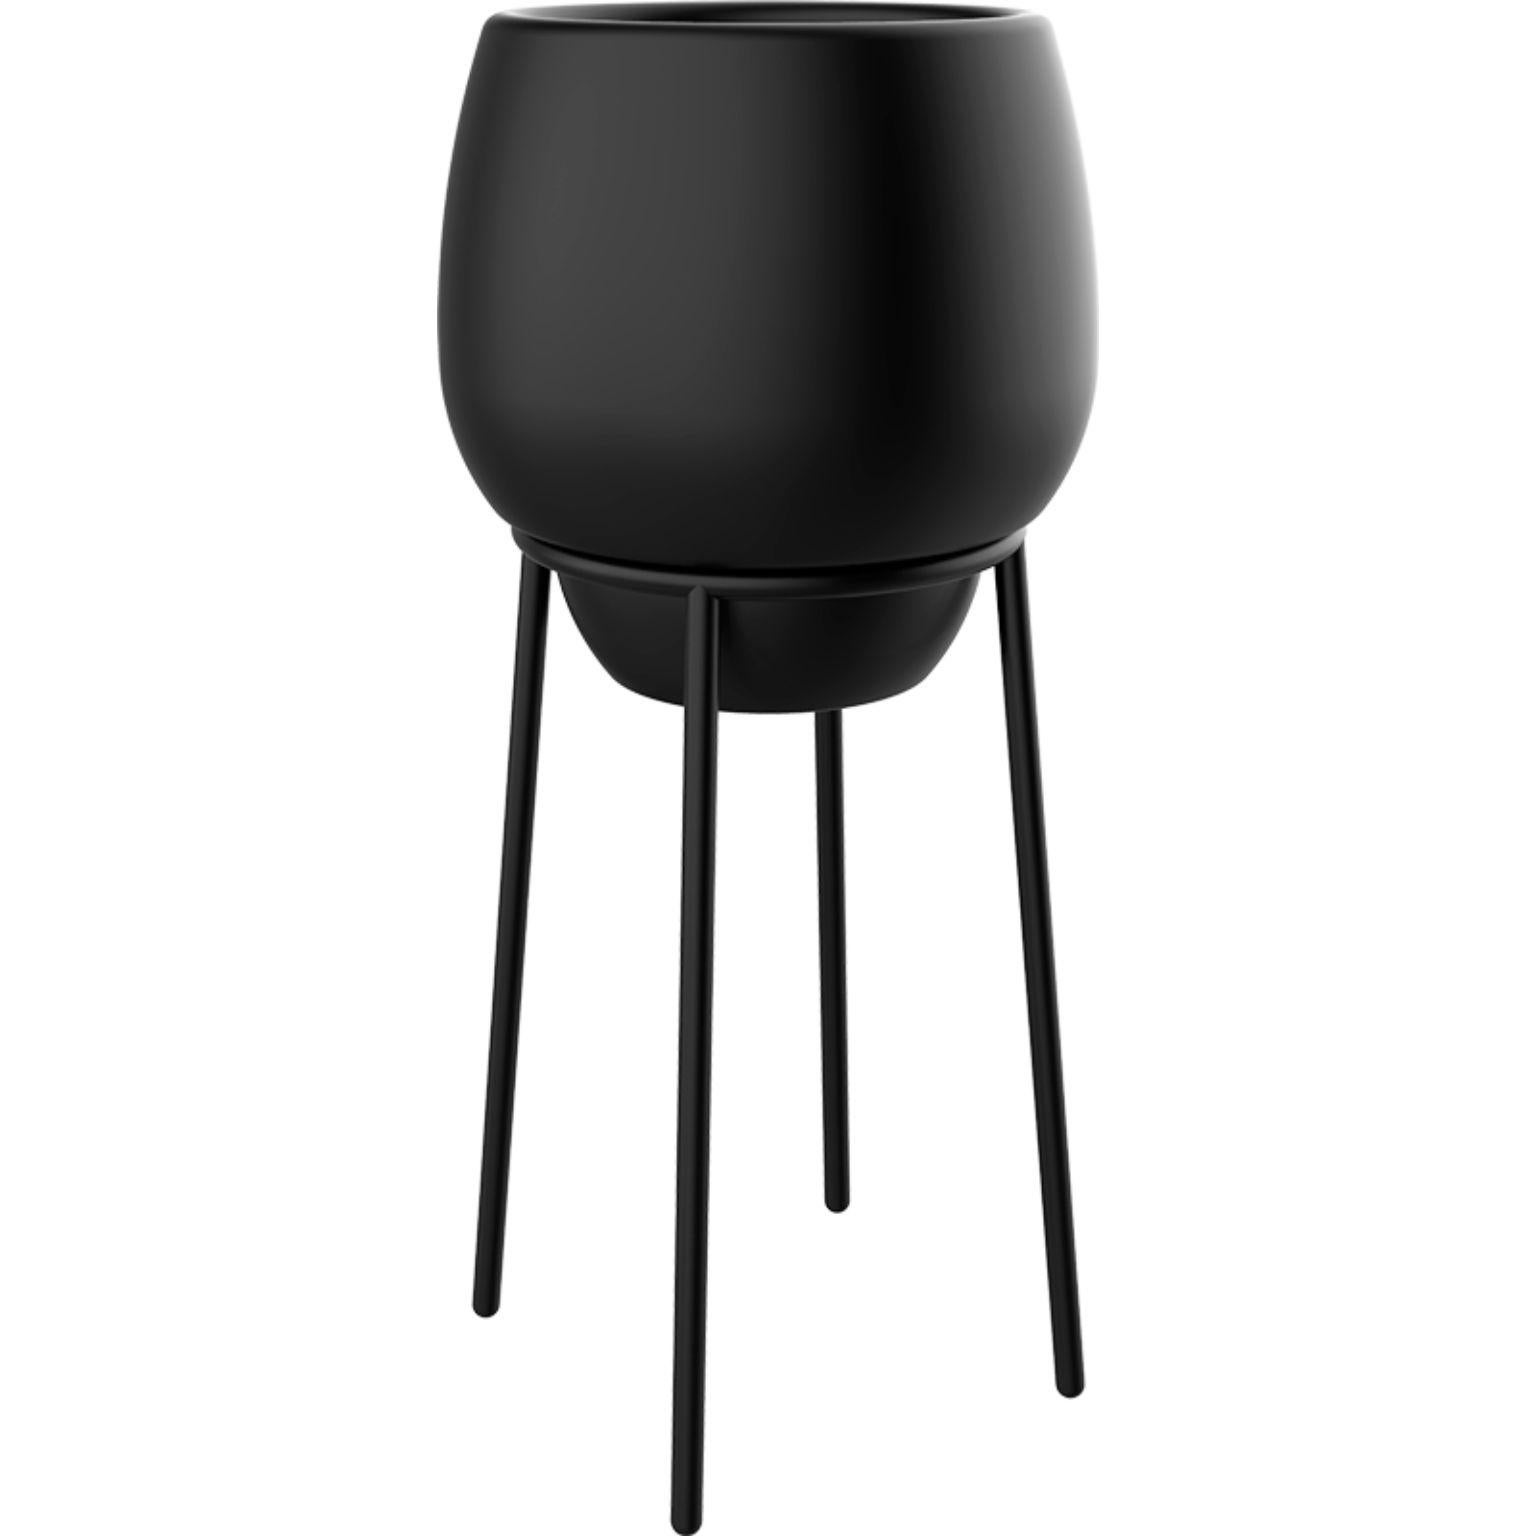 Lace black high 50 Pot by Mowee
Dimensions: Ø55 x H112 cm.
Material: Polyethylene and stainless steel.
Weight: 9 kg.
Also available in different colors and finishes (Lacquered or retroilluminated).

Lace is a collection of furniture made by